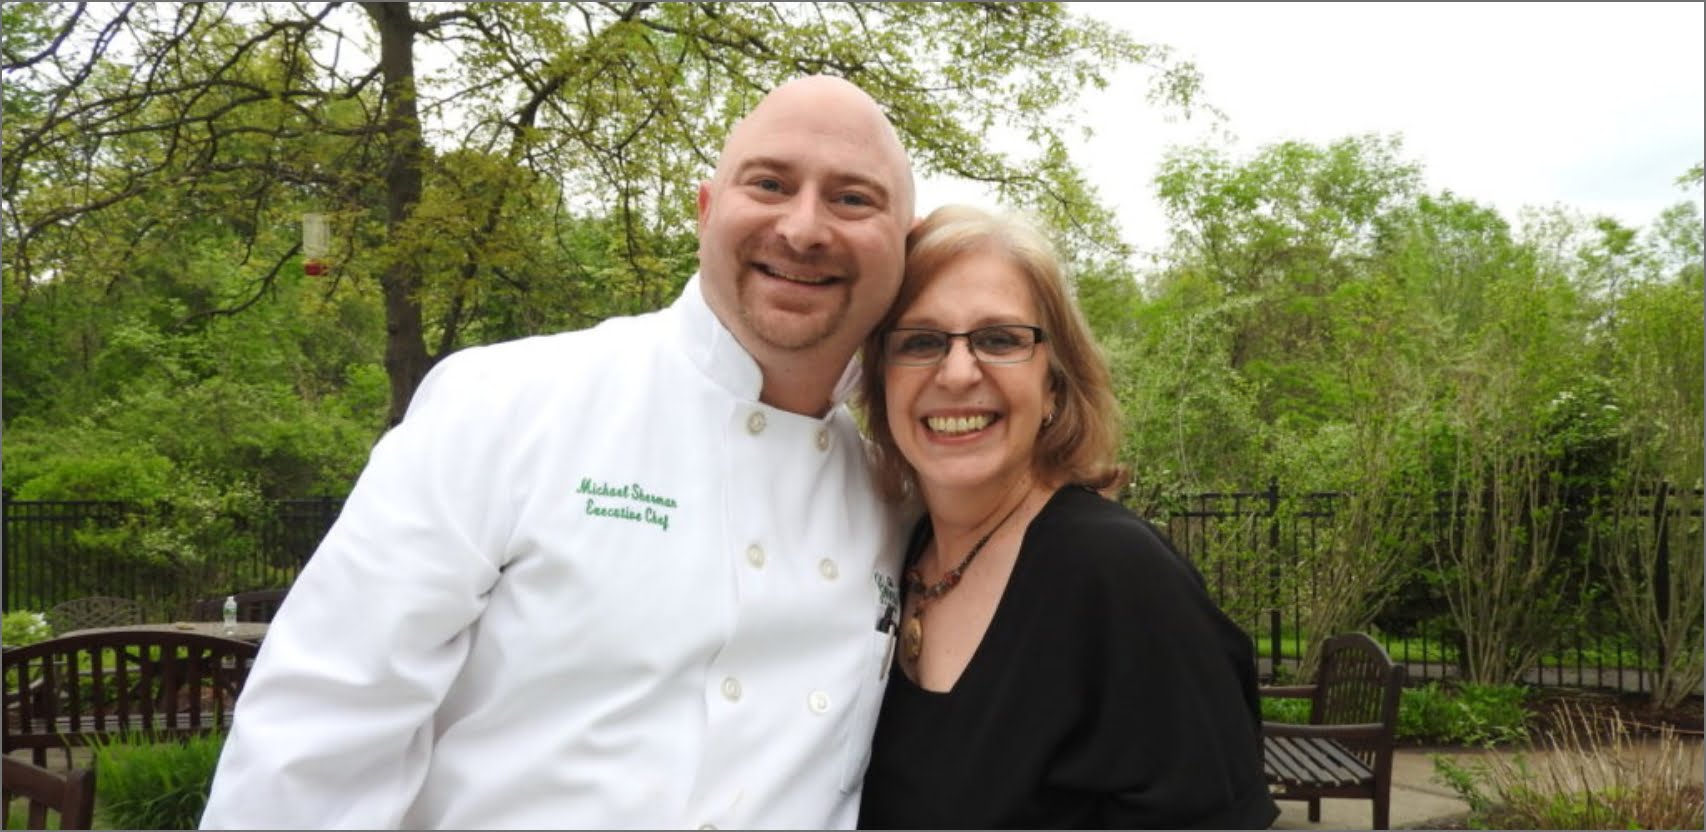 Introducing The Greens at Greenwich Executive Chef Michael Sherman and His Pumpkin Bisque Soup